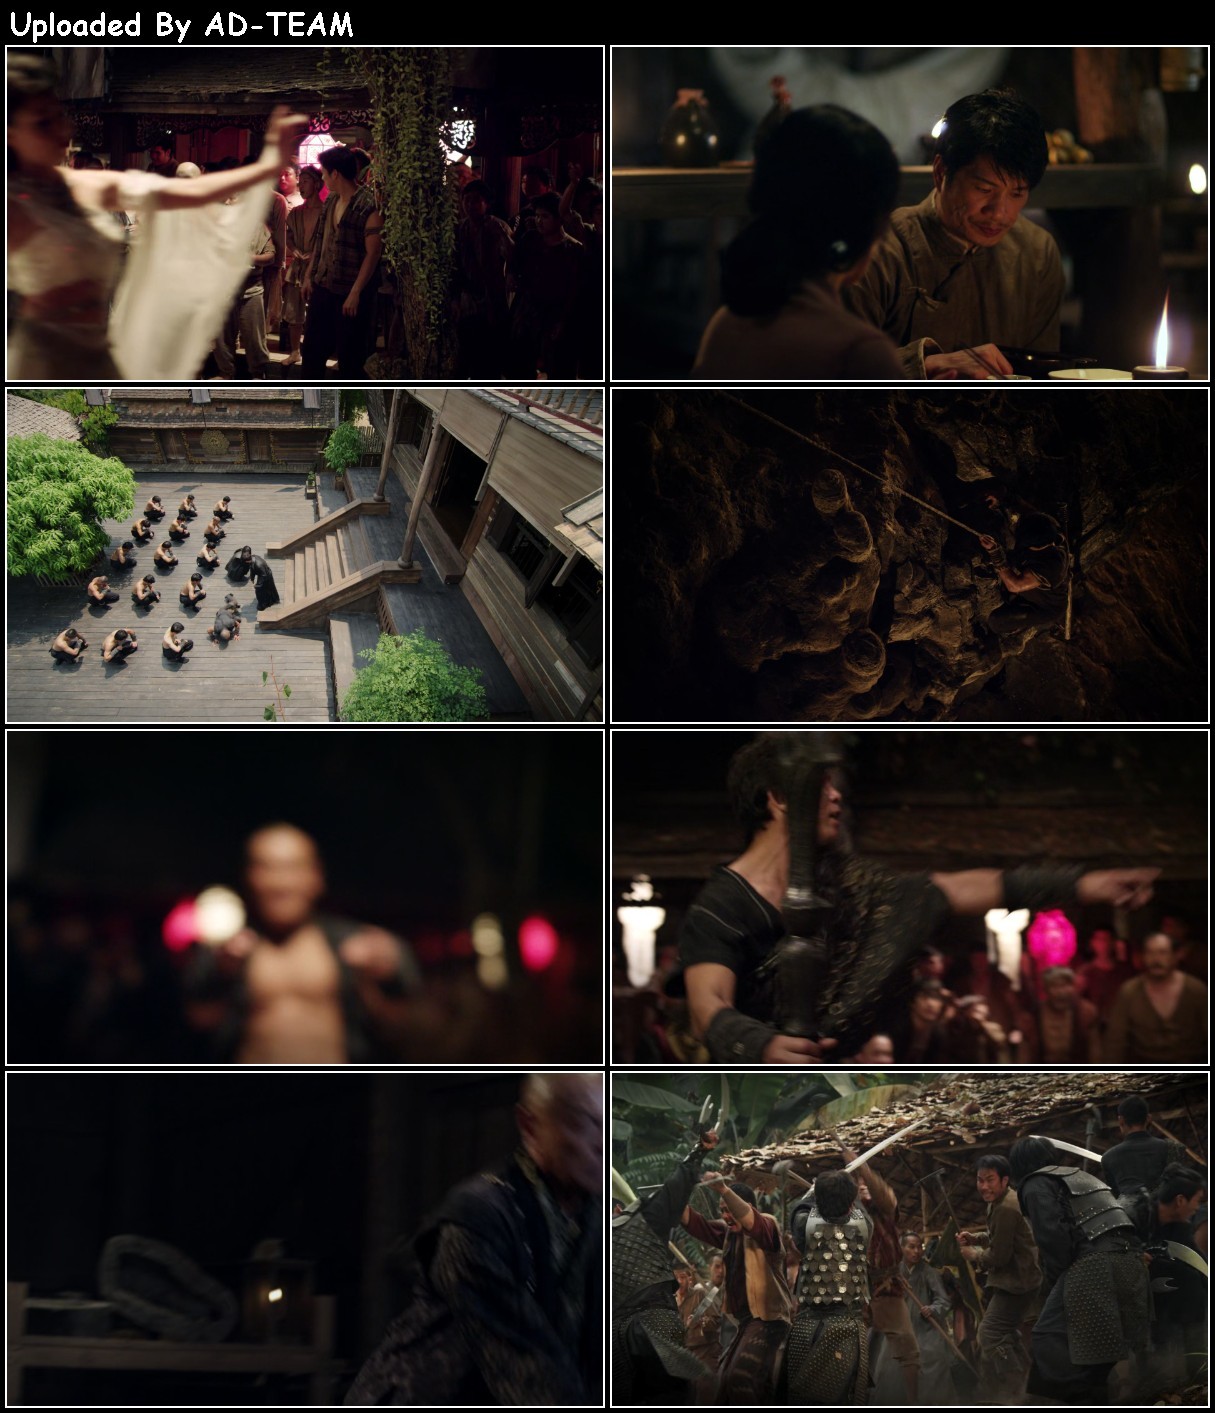 The Man with The Iron Fists 2 2015 UNRATED 1080p BluRay x265-RARBG DpJGbFQ3_o